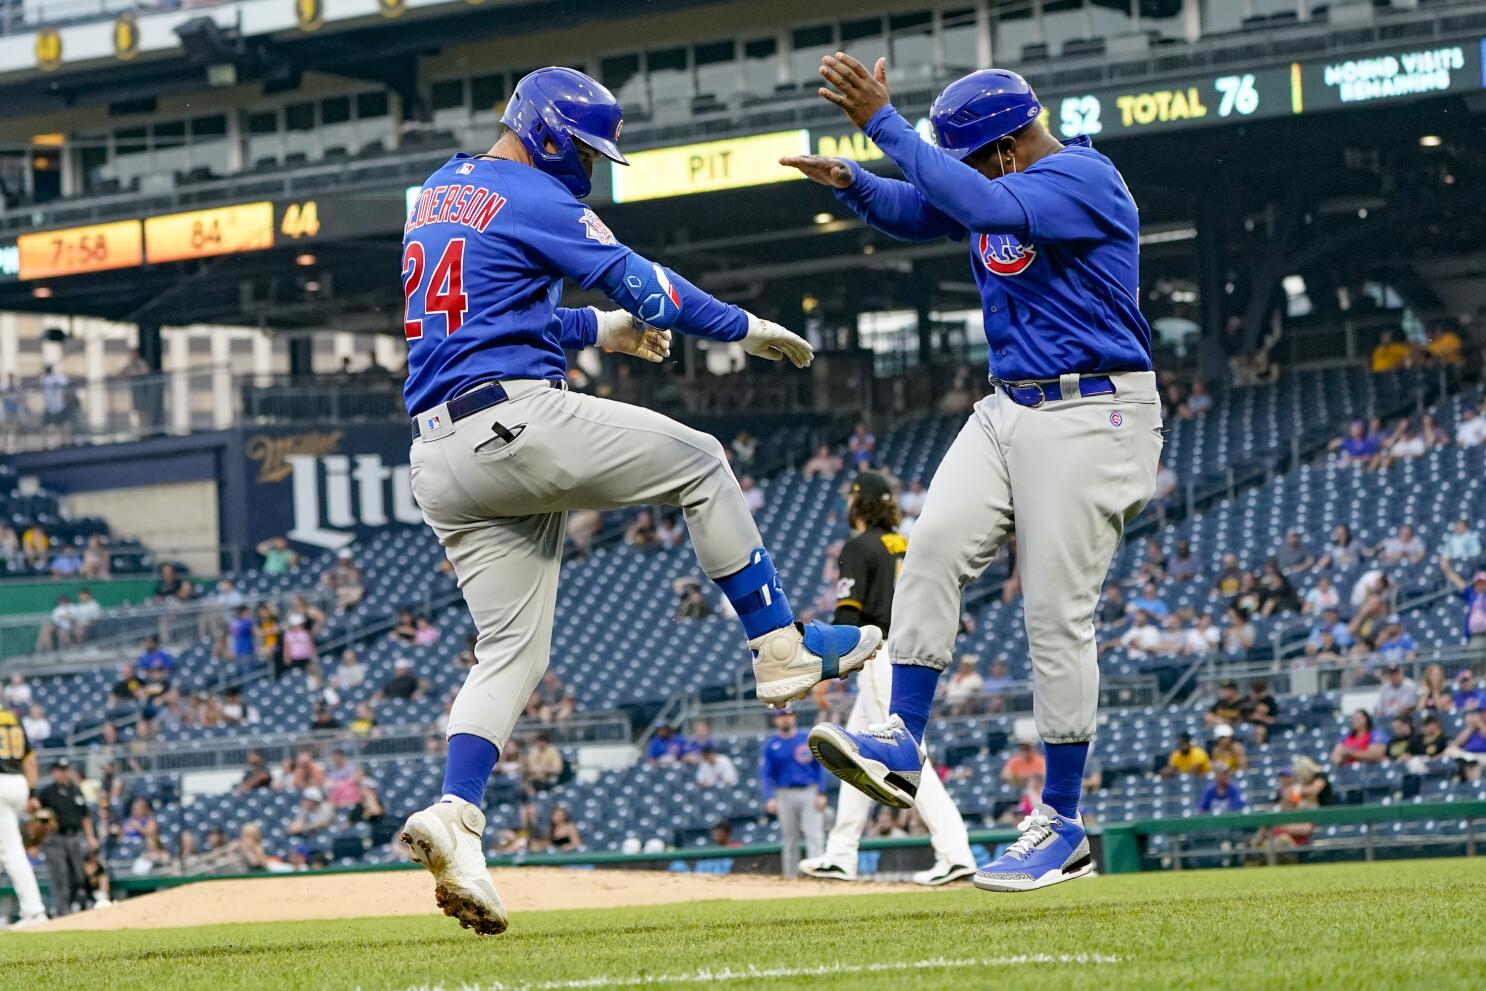 Jake Arrieta shines in return to mound as Cubs top Tigers - Chicago  Sun-Times